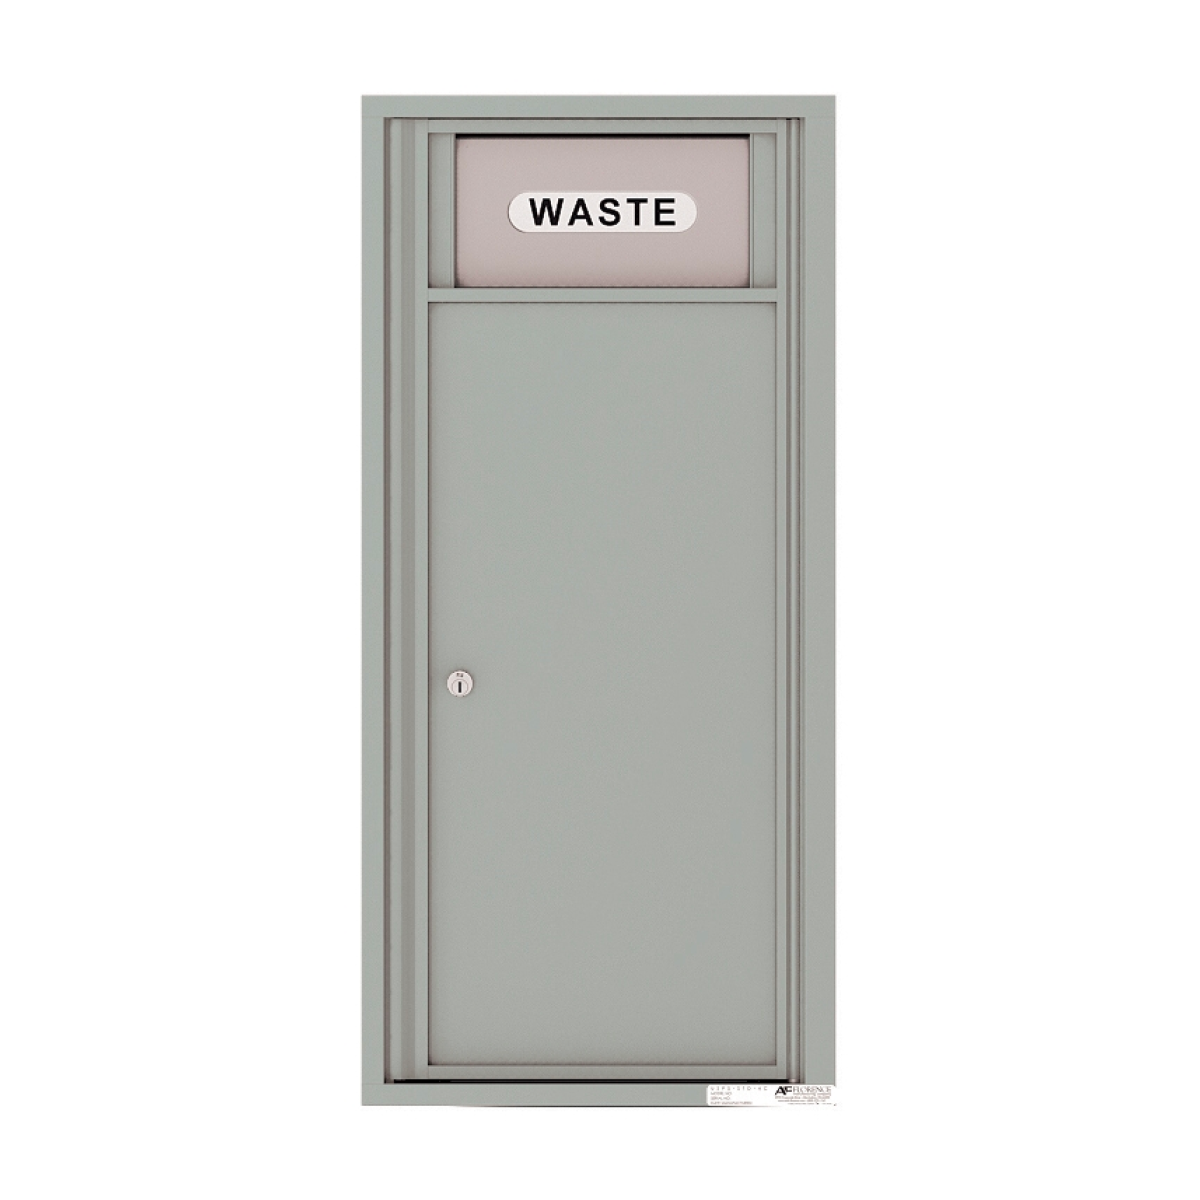 4C Mailboxes 4CADS-Bin Trash and Recycling Bin Product Image